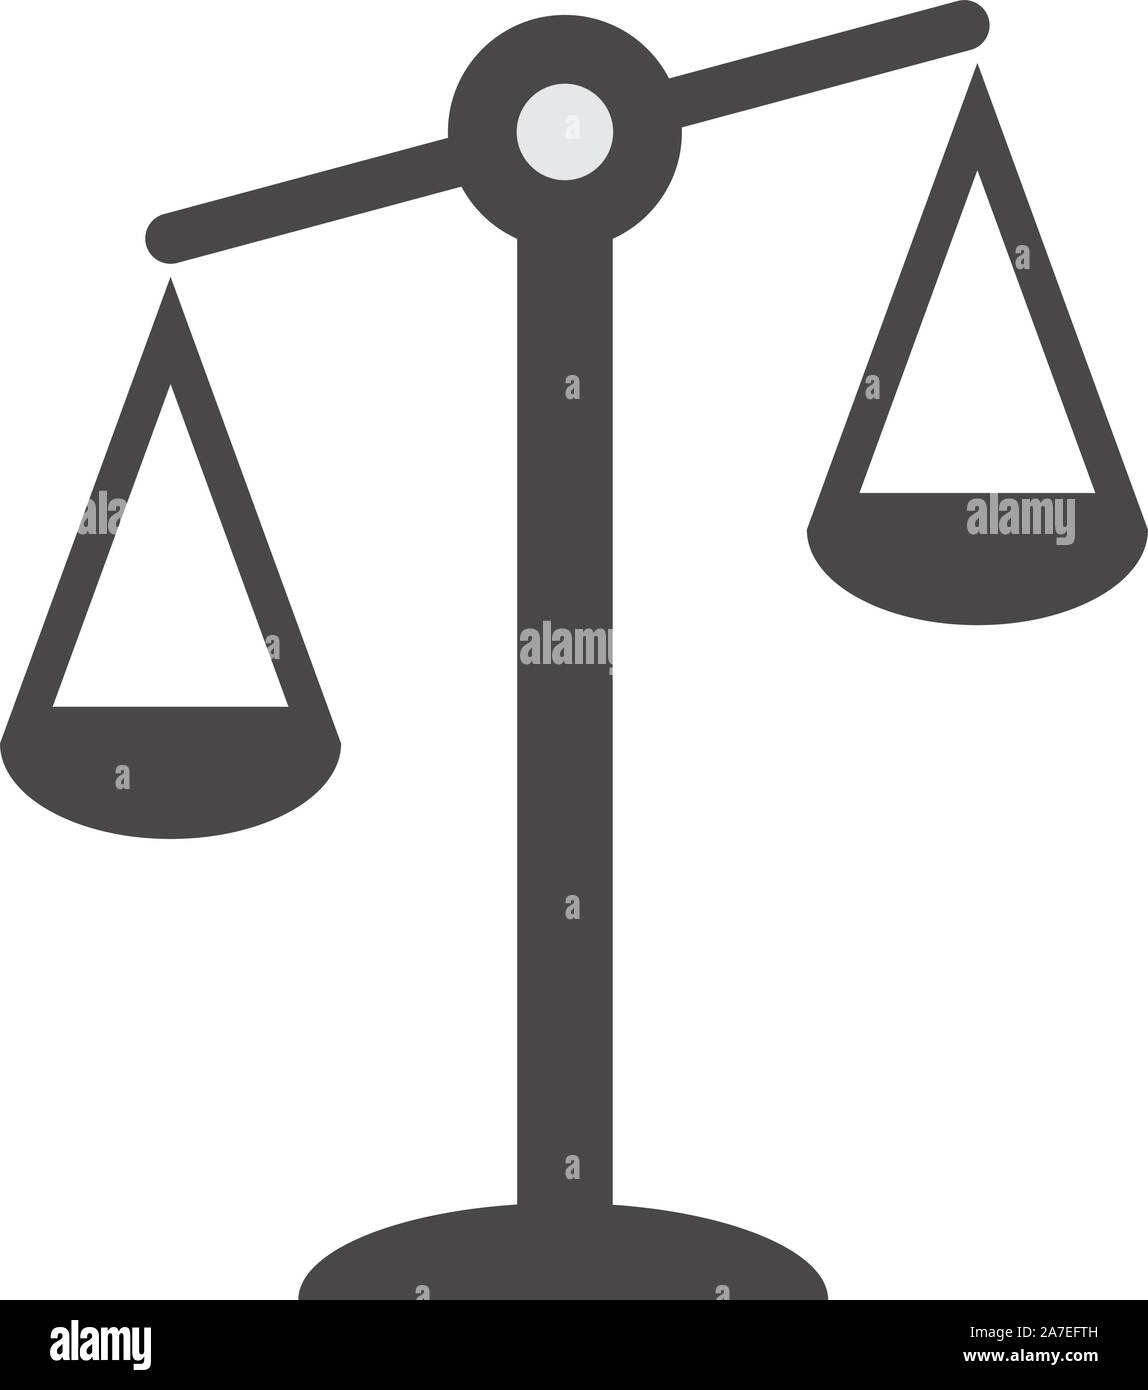 https://c8.alamy.com/comp/2A7EFTH/pictograph-of-justice-scales-flat-style-scales-icon-for-your-web-site-design-logo-app-ui-2A7EFTH.jpg